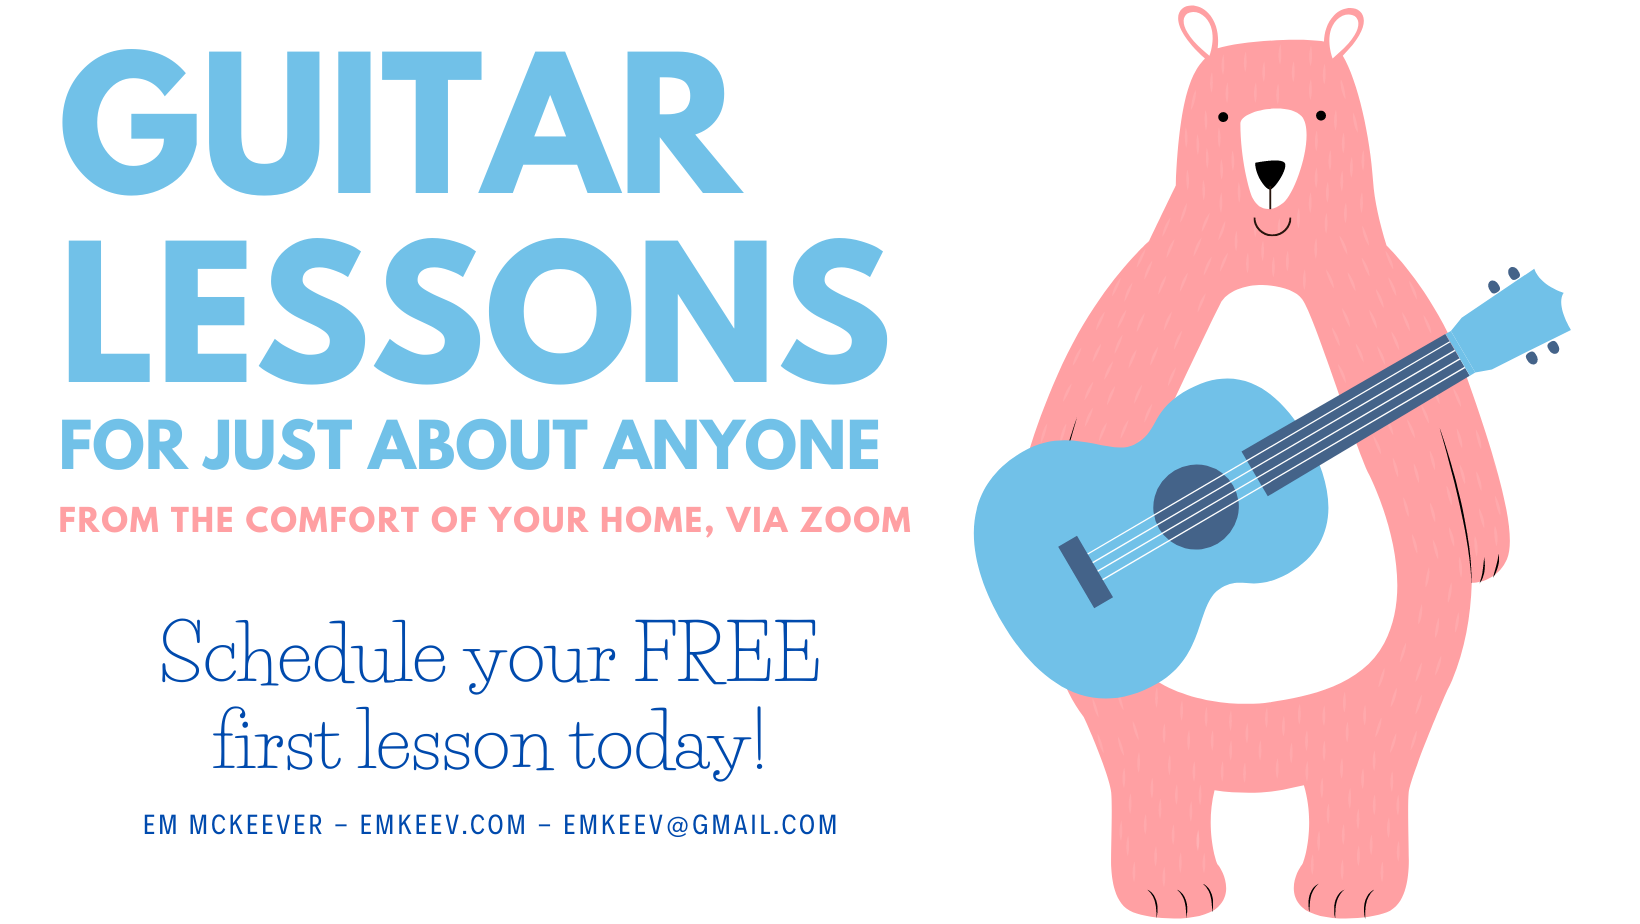 Sign up for lessons!